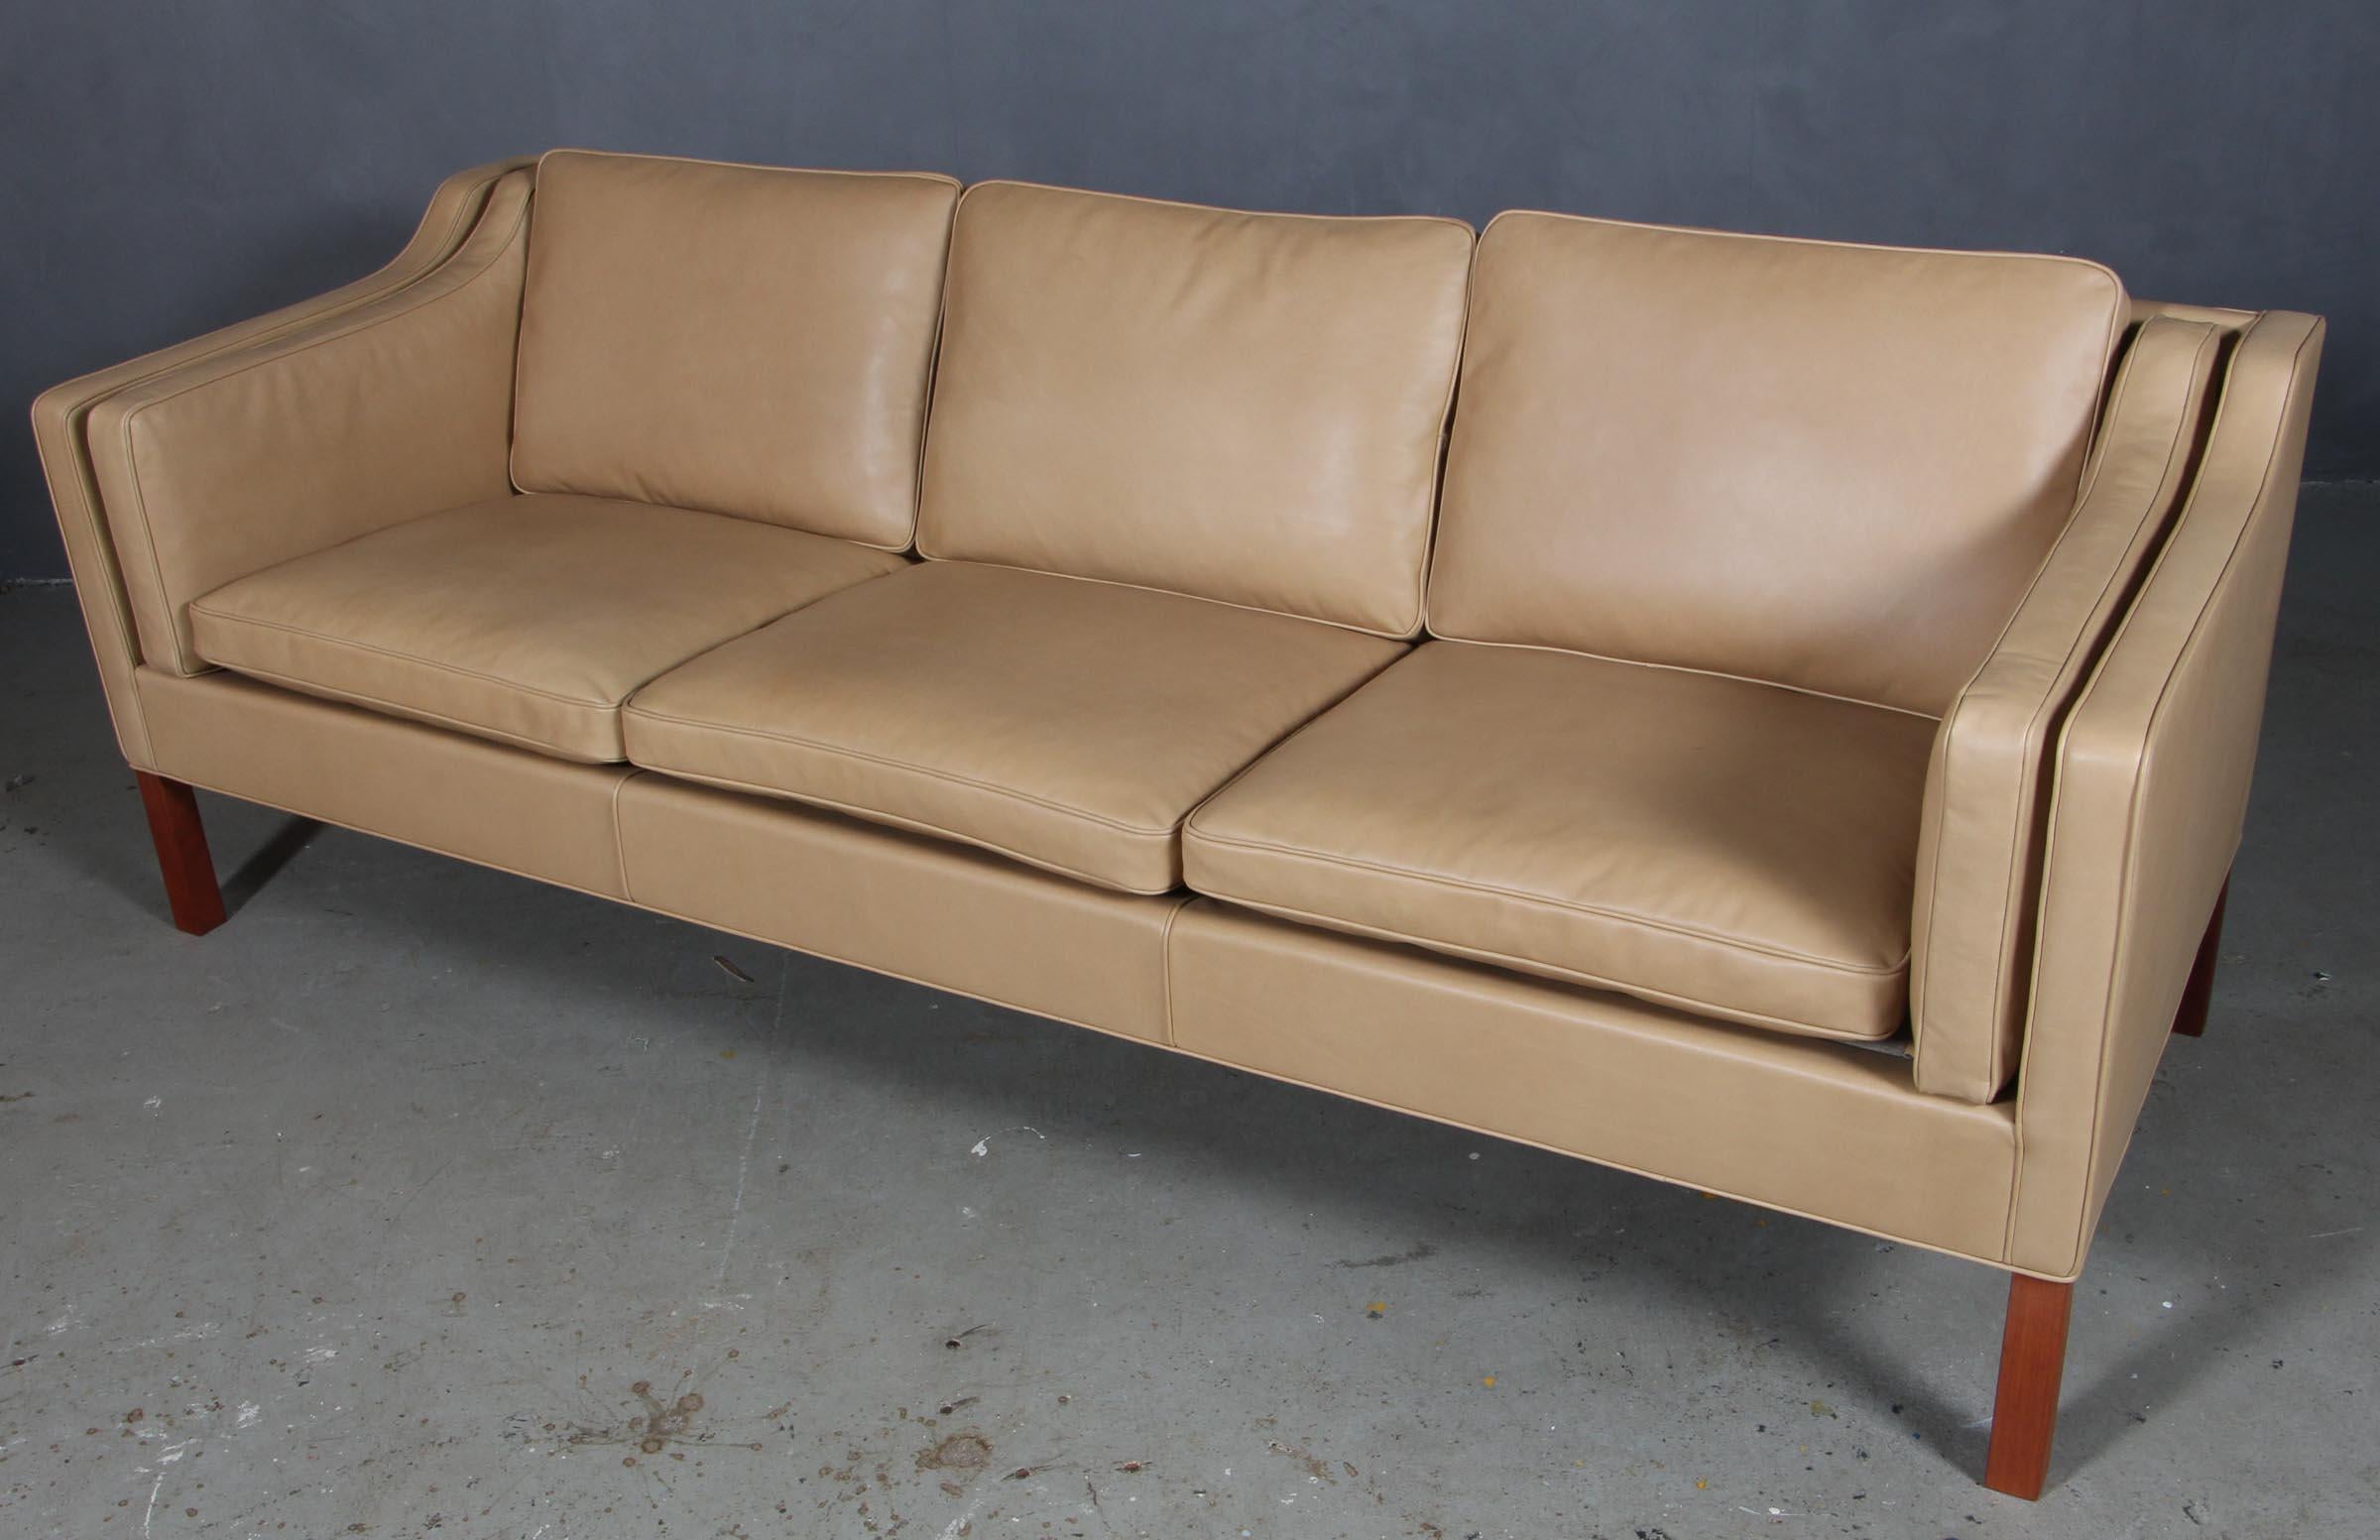 Børge Mogensen three-seat sofa new upholstered with jepard aniline leather.

Legs of teak.

Model 2213, made by Fredericia Furniture.